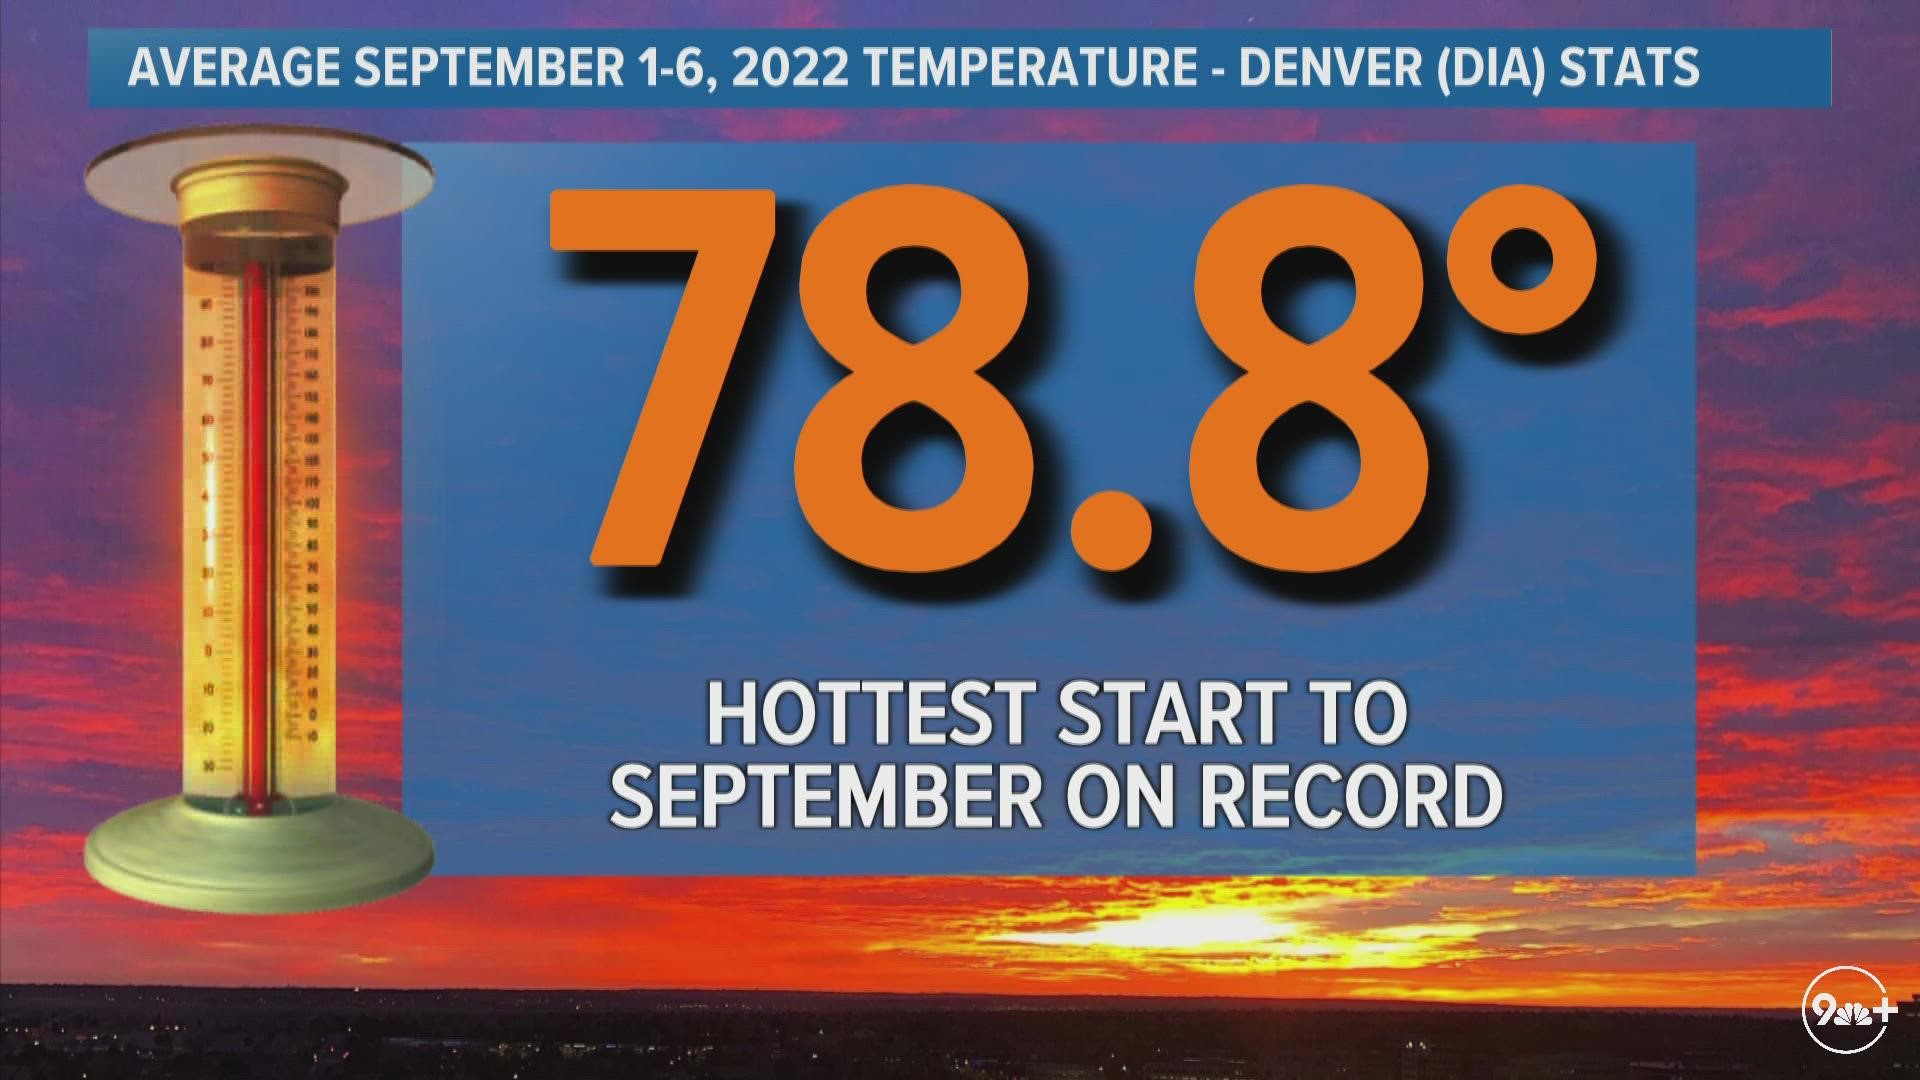 The extreme heat continues in Colorado through Thursday before a big cooldown for Friday and Saturday.